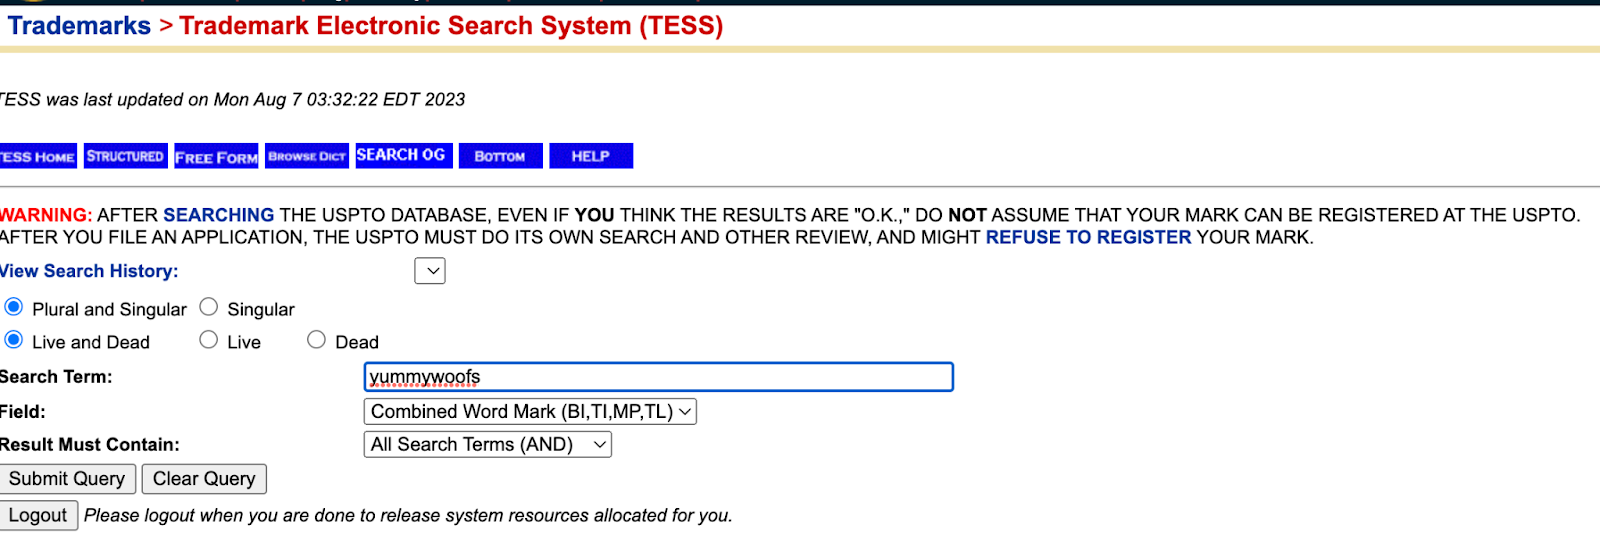 Screenshot of Trademark Electronic Search System (TESS)